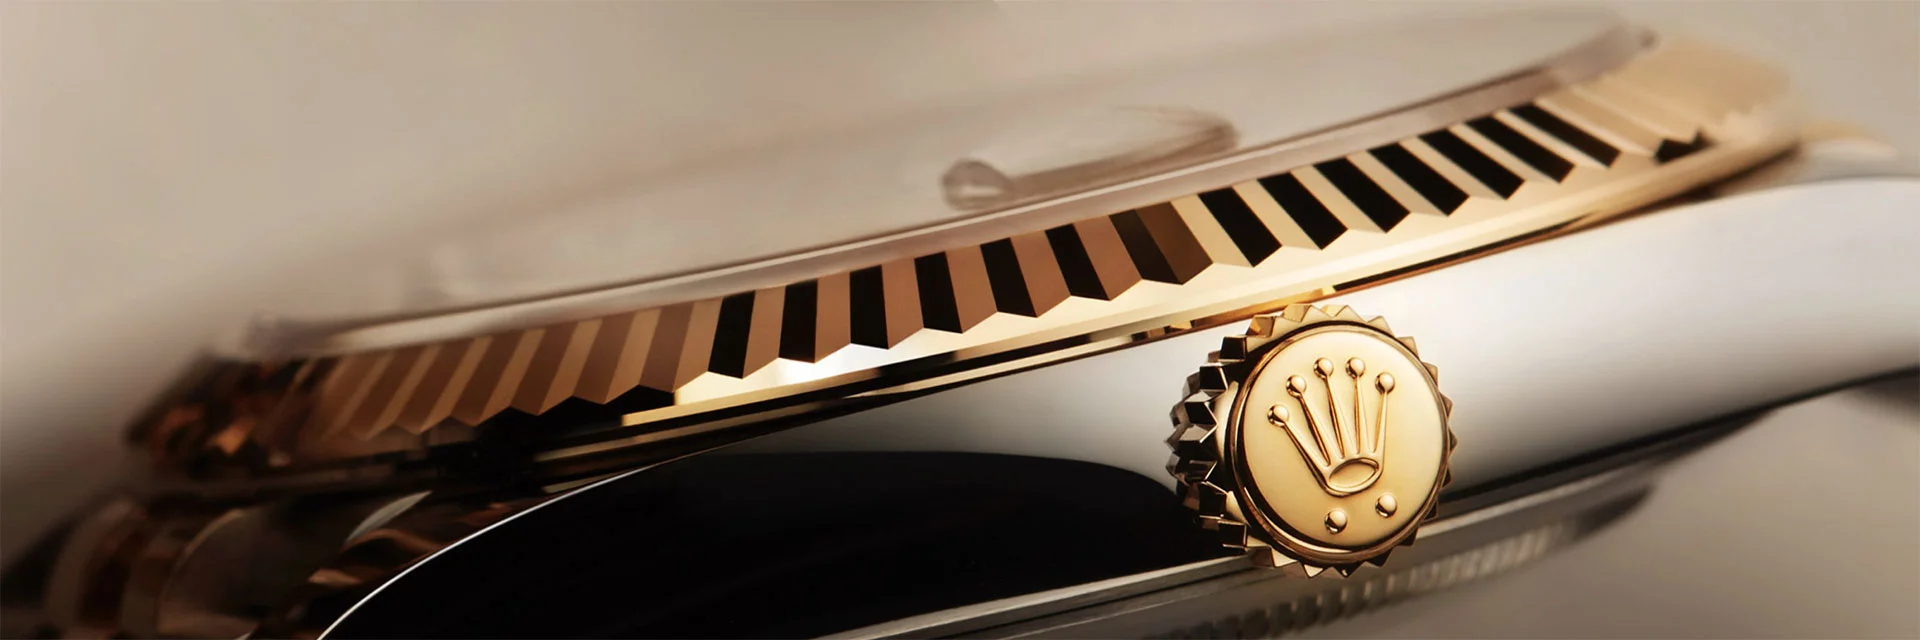 Discover the Rolex collection